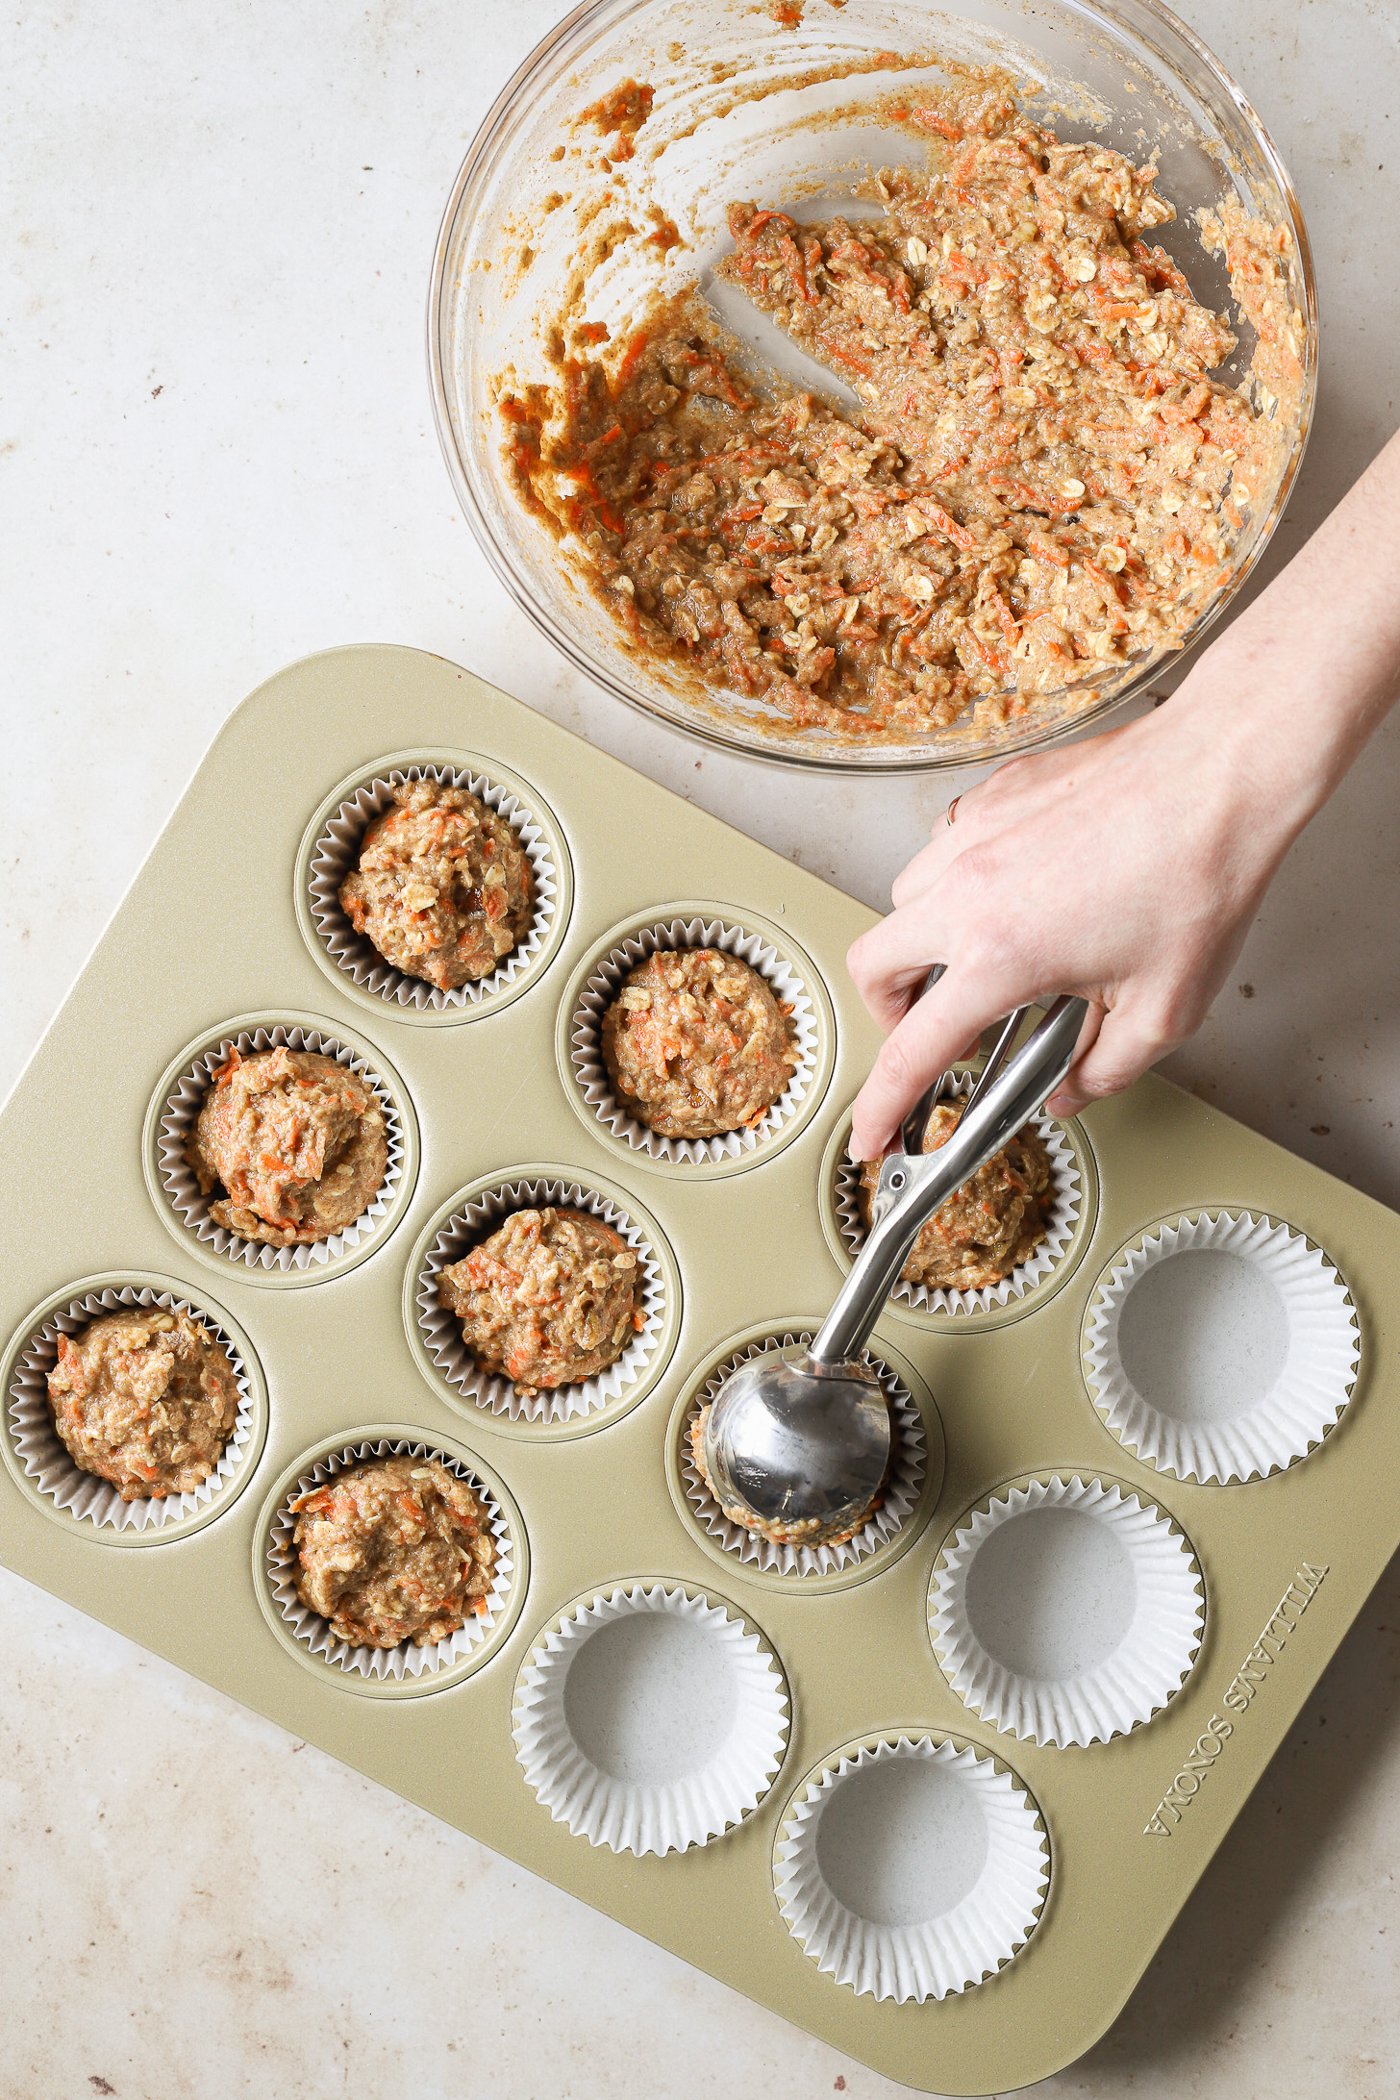 Oatmeal carrot muffin batter being portioned into a lined muffin tin with a small scooper.